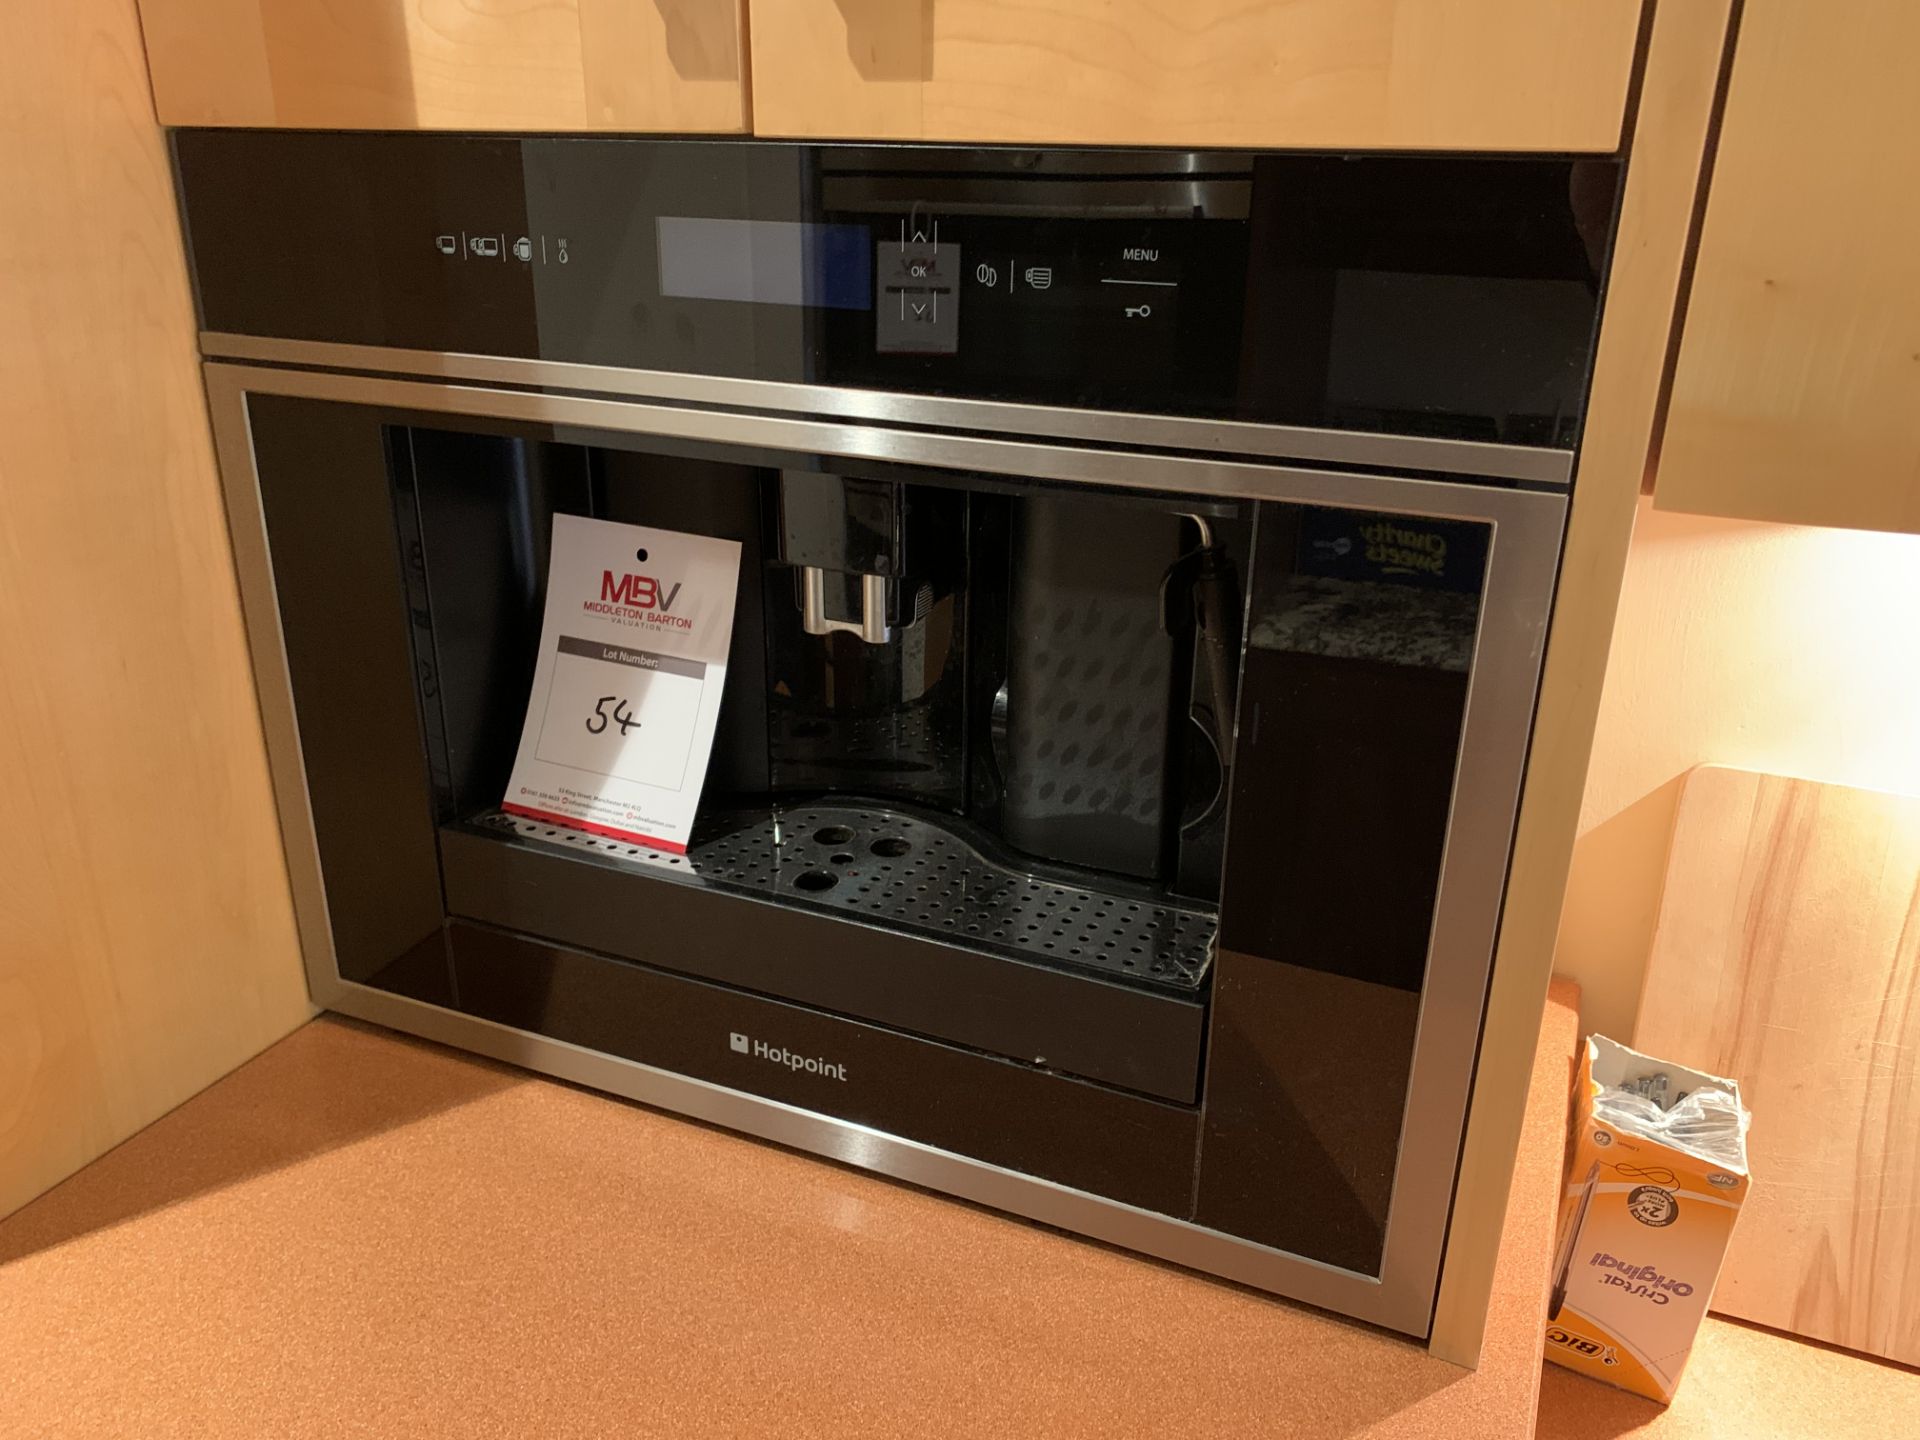 Ex-Dsiplay Hotpoint integrated coffee machine